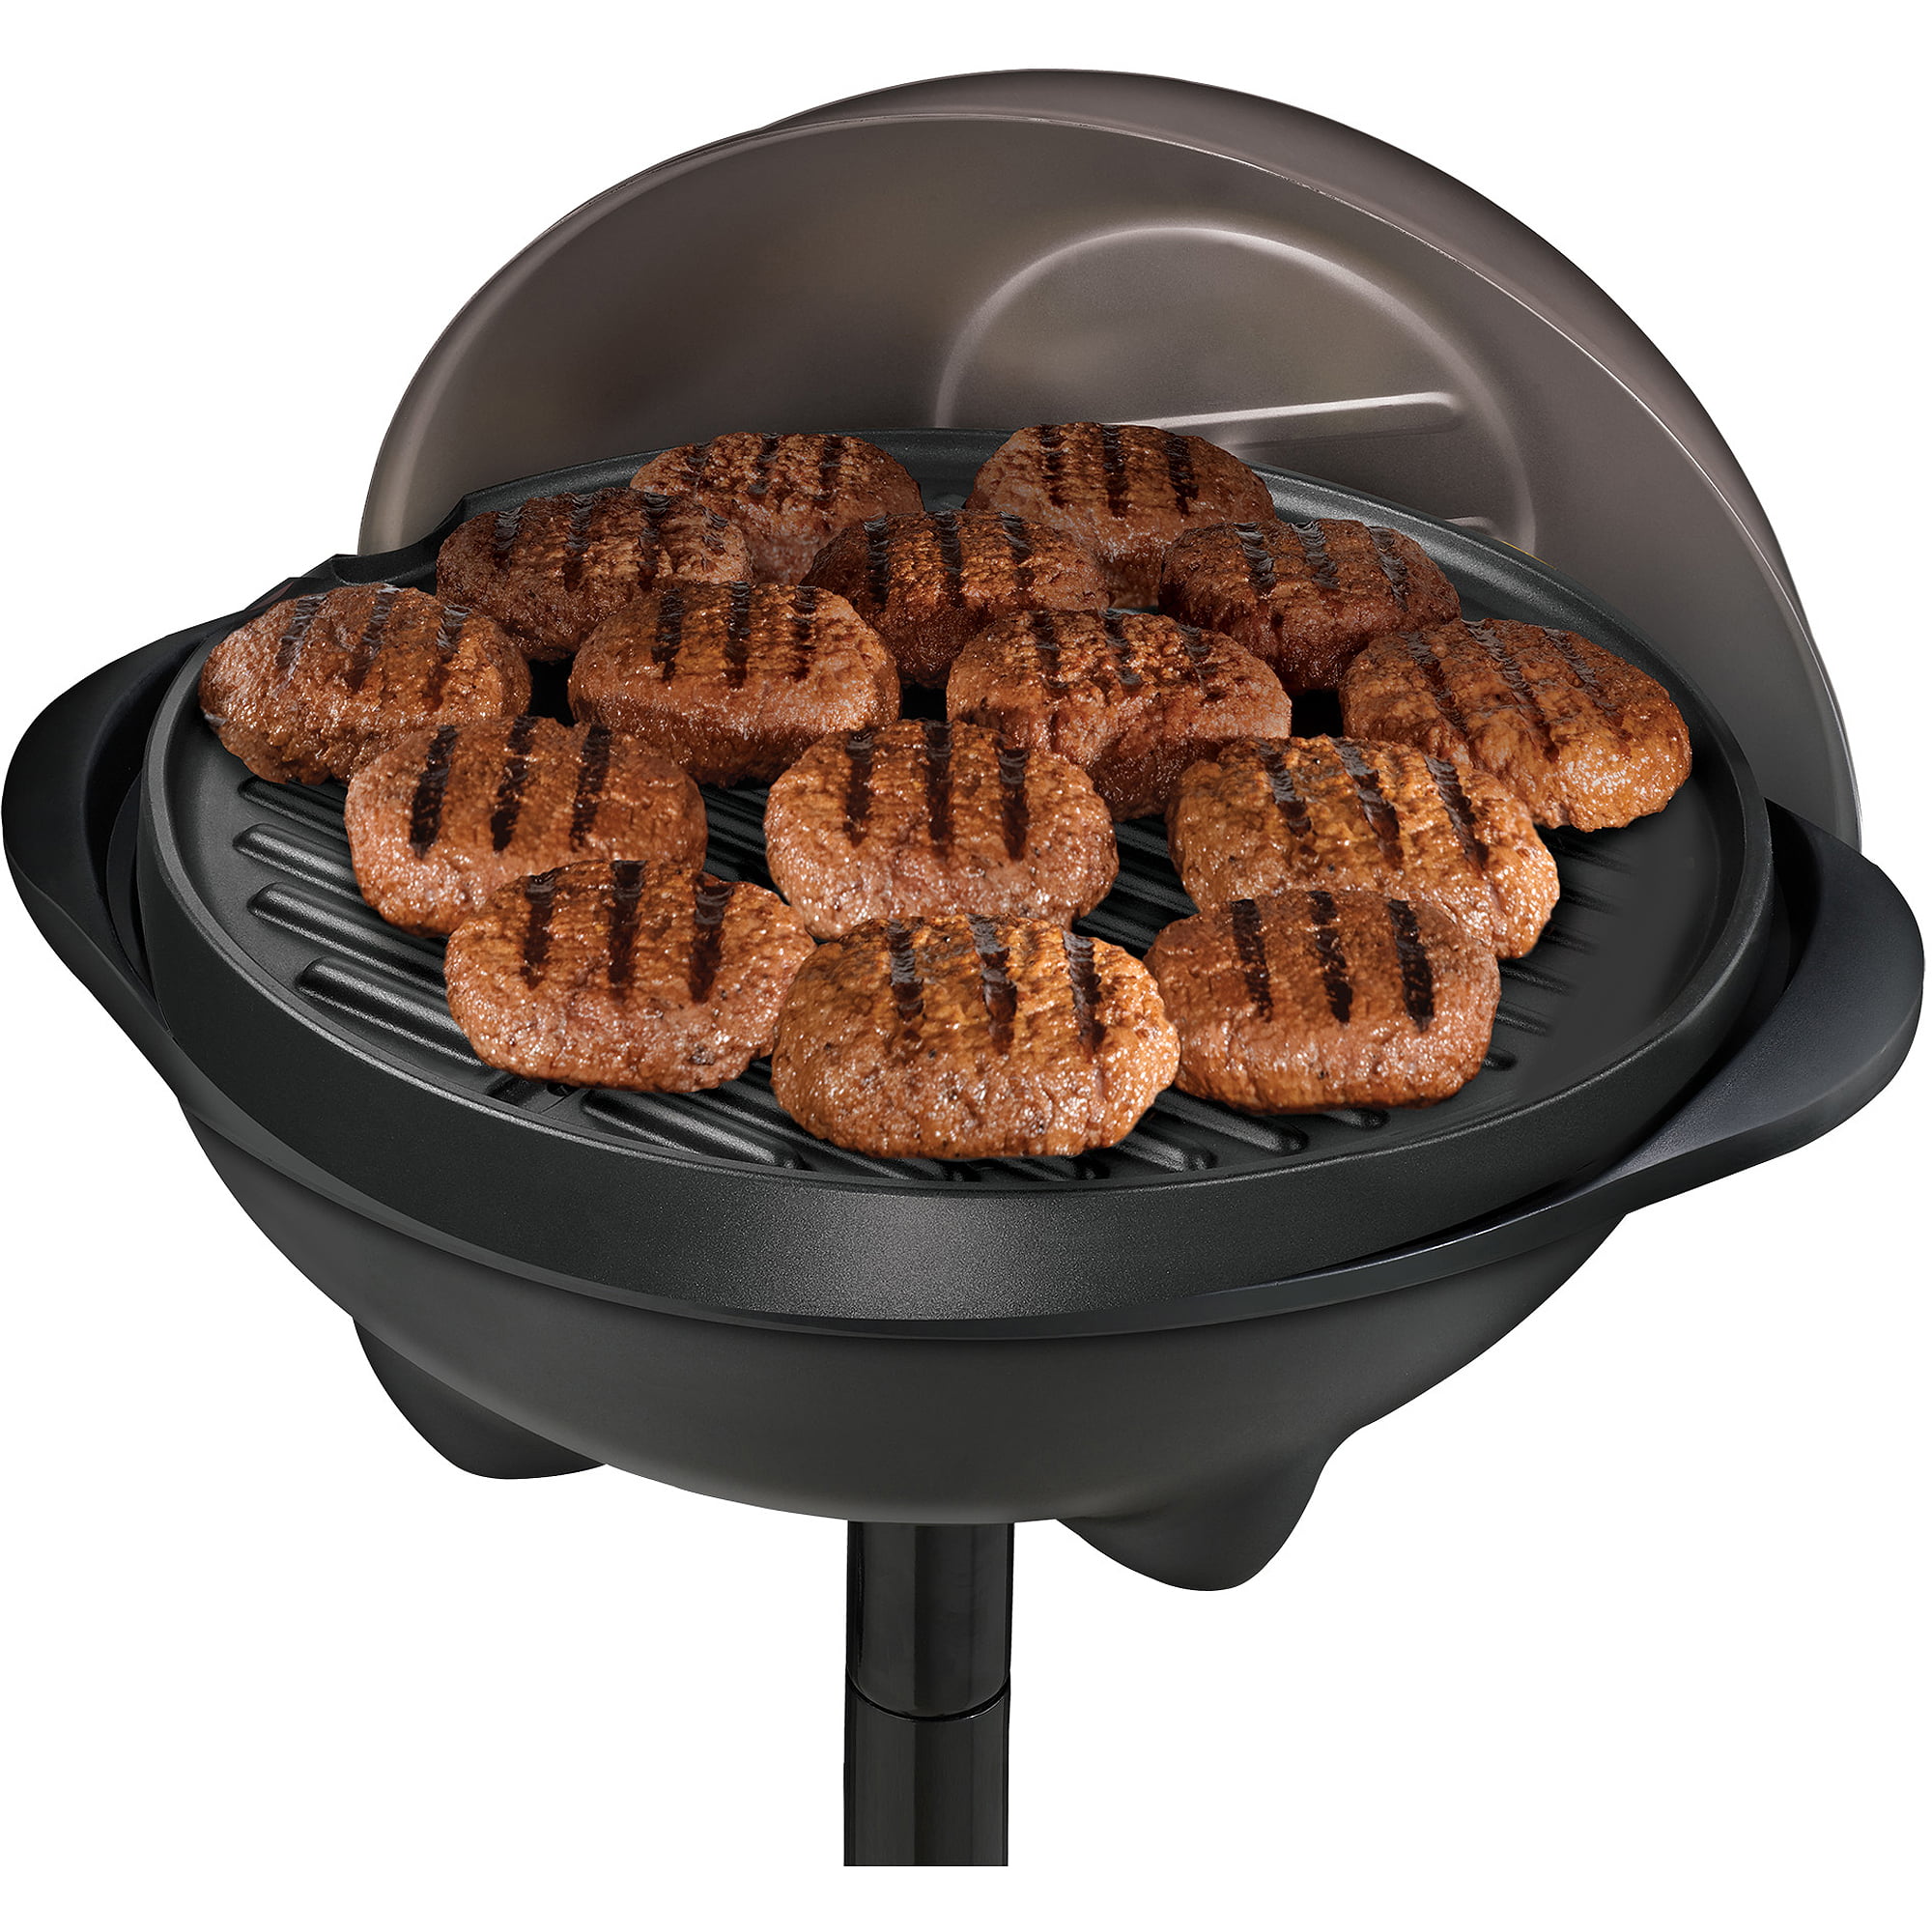  George Foreman GFO240S Indoor/Outdoor Electric Grill, 23.50 x  21.20 x 12.10, Silver: Home & Kitchen